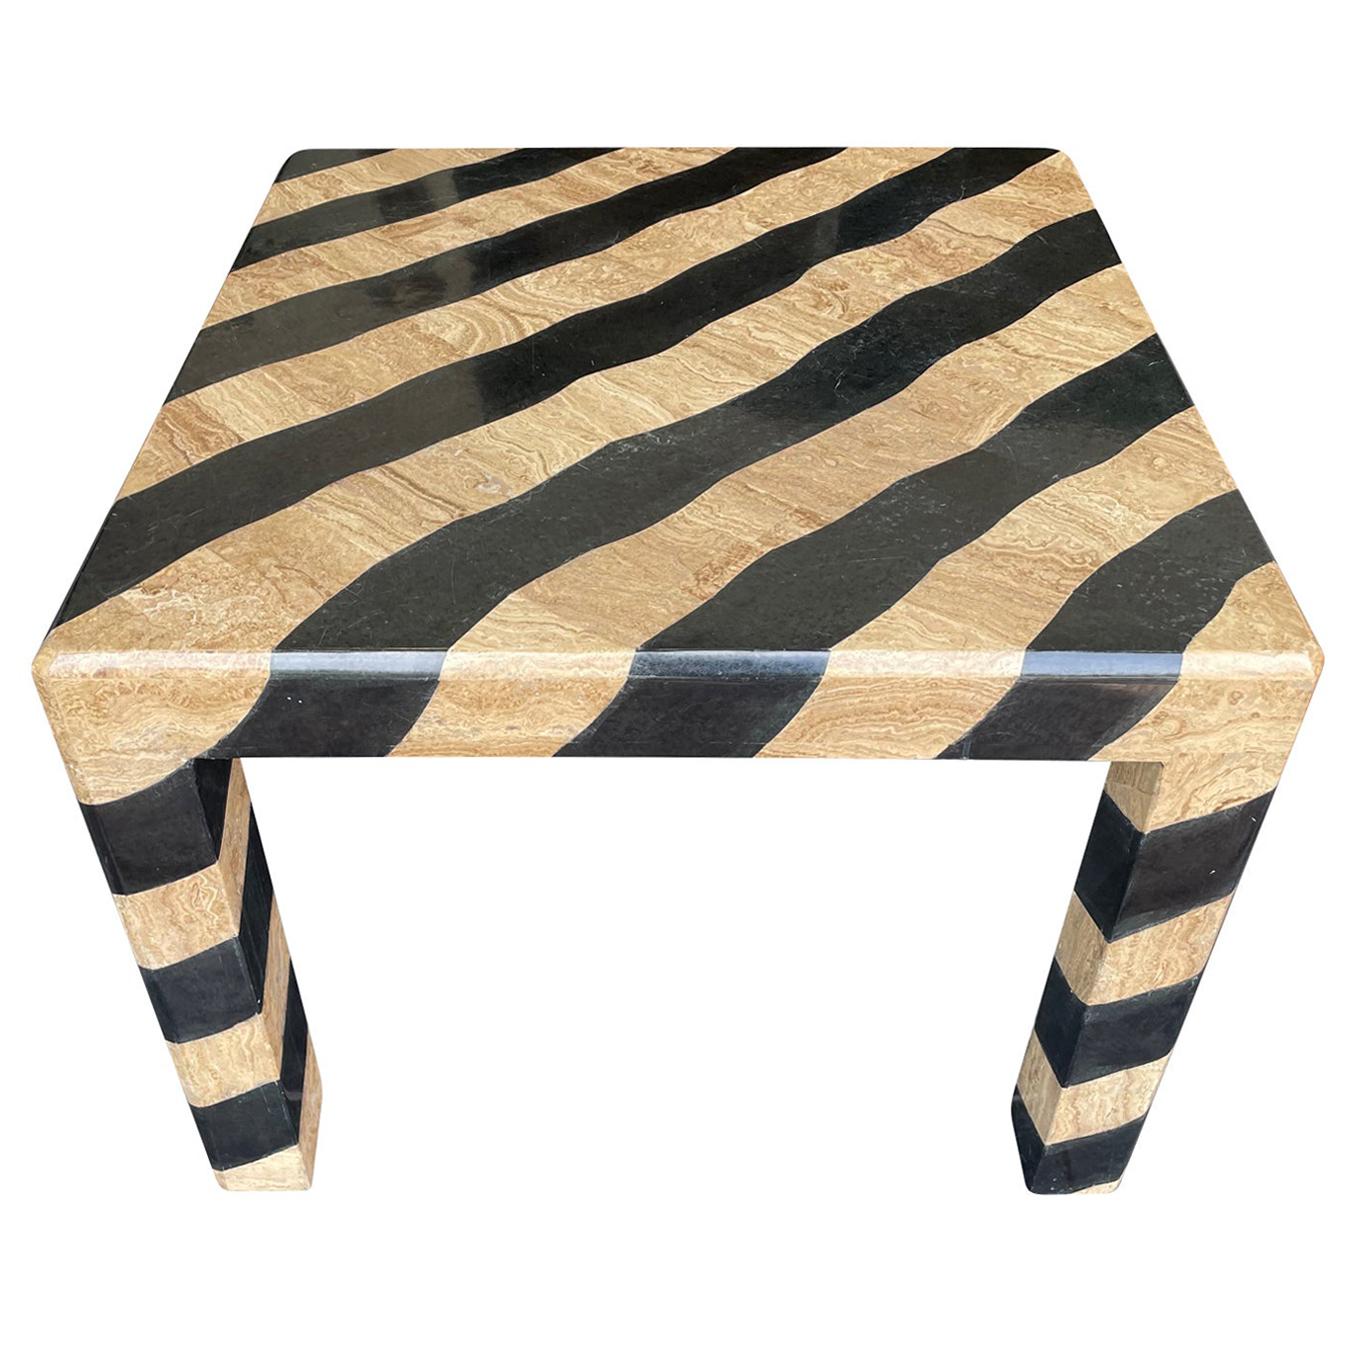 Maitland Smith Coffee Table with Tessellated Marble Zebra Pattern Finish